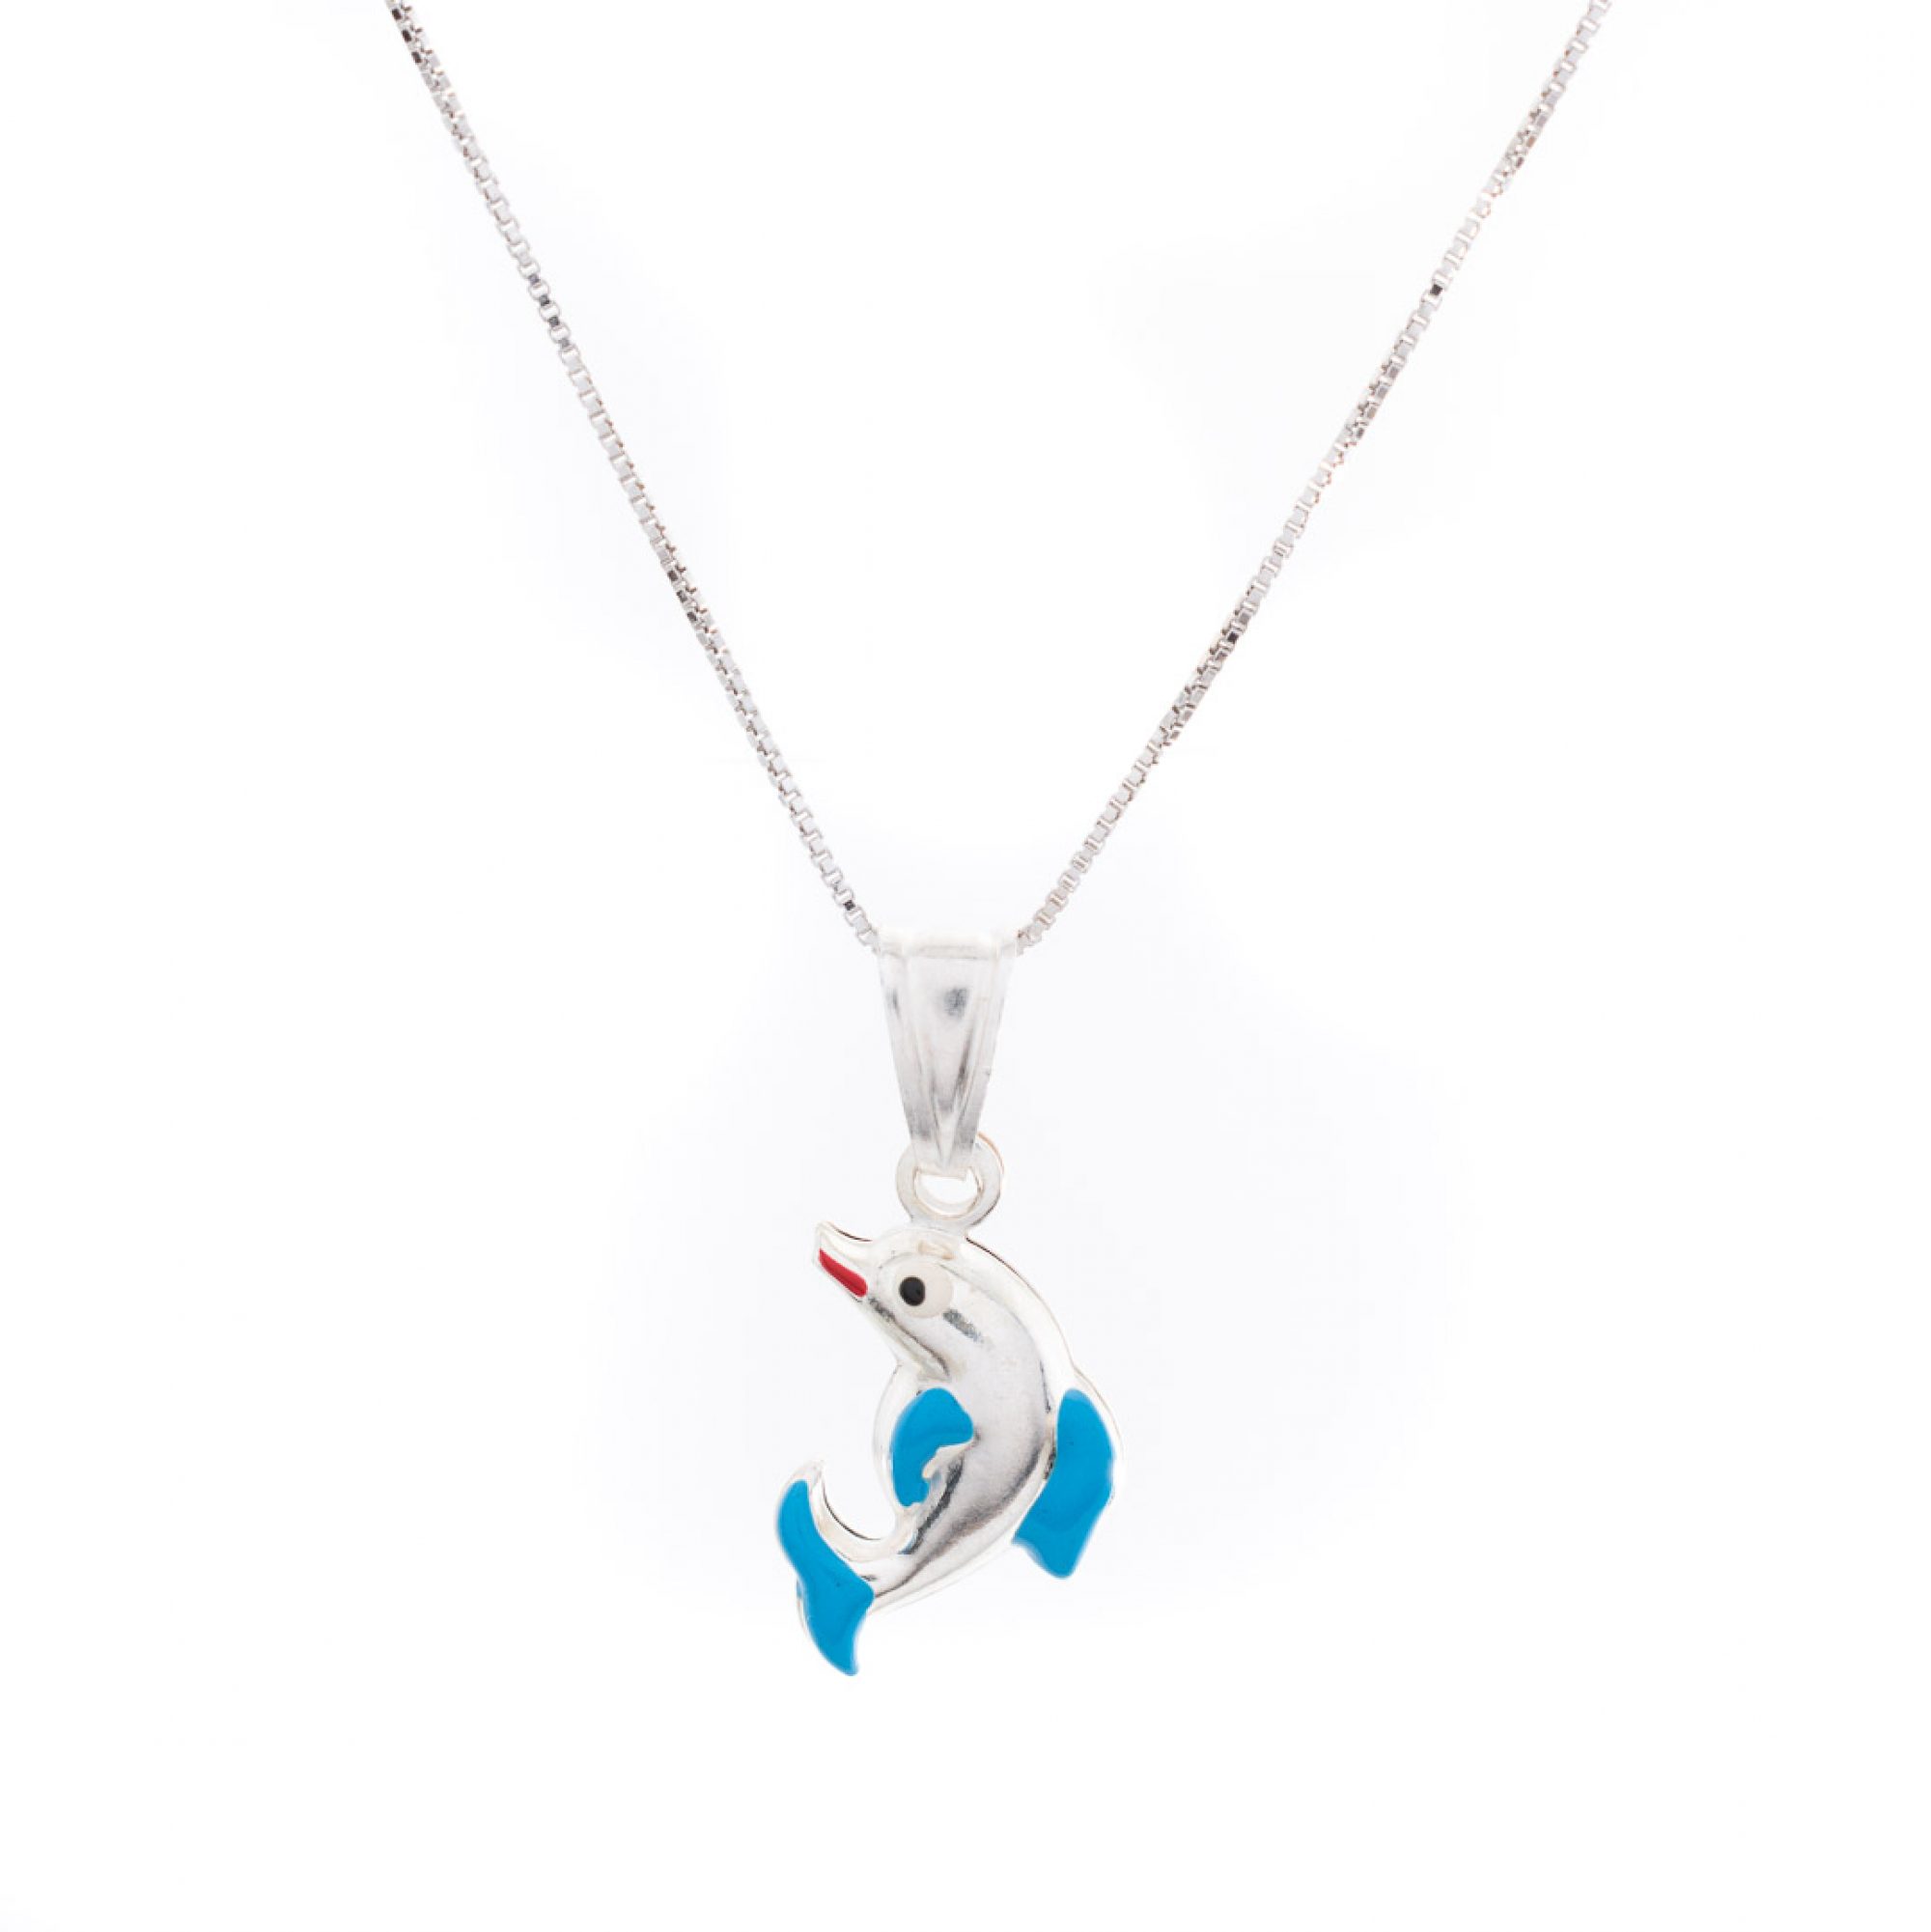 Dolphin necklace with enamel